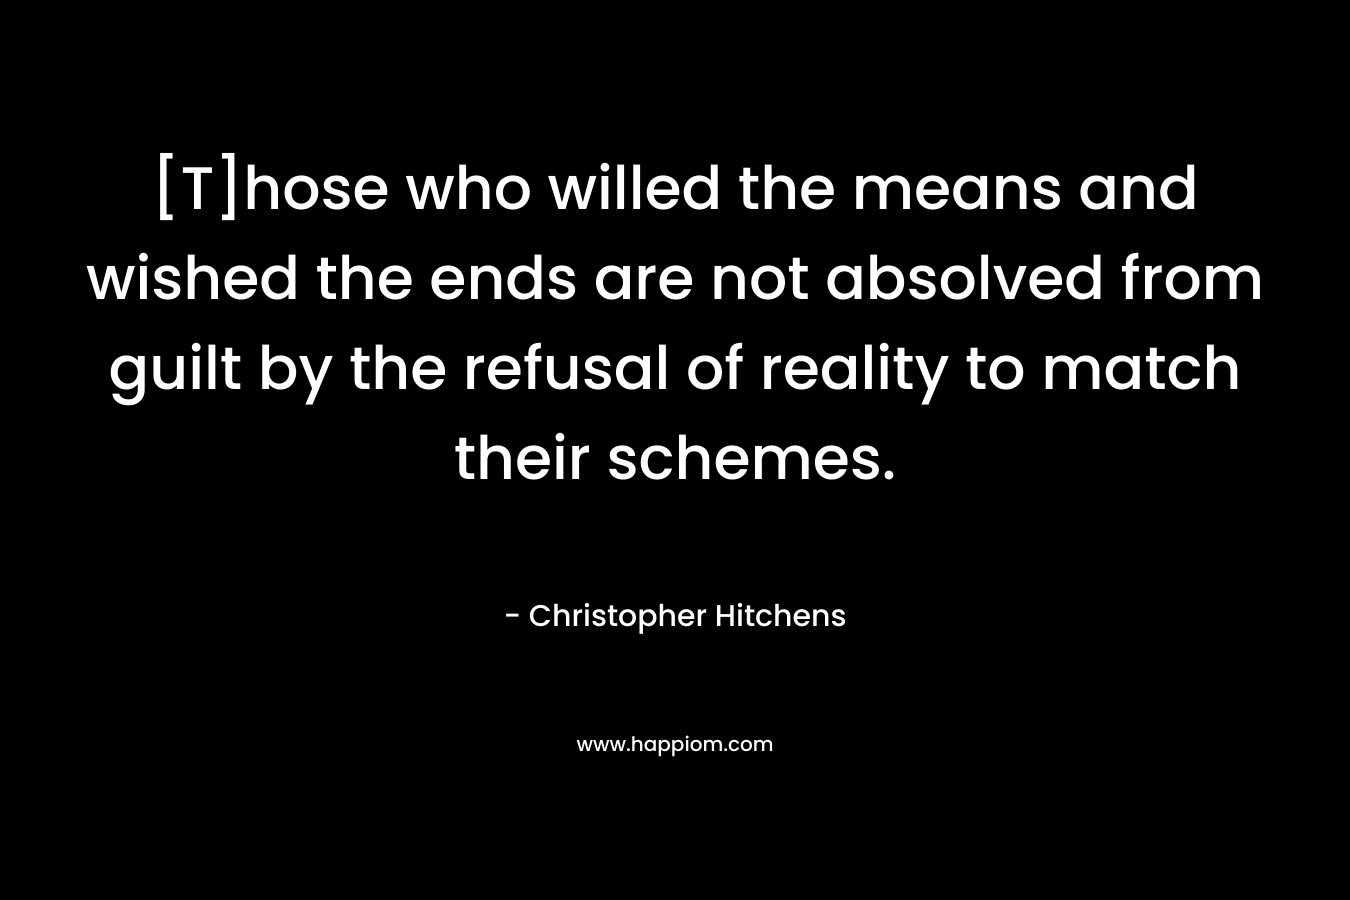 [T]hose who willed the means and wished the ends are not absolved from guilt by the refusal of reality to match their schemes. – Christopher Hitchens